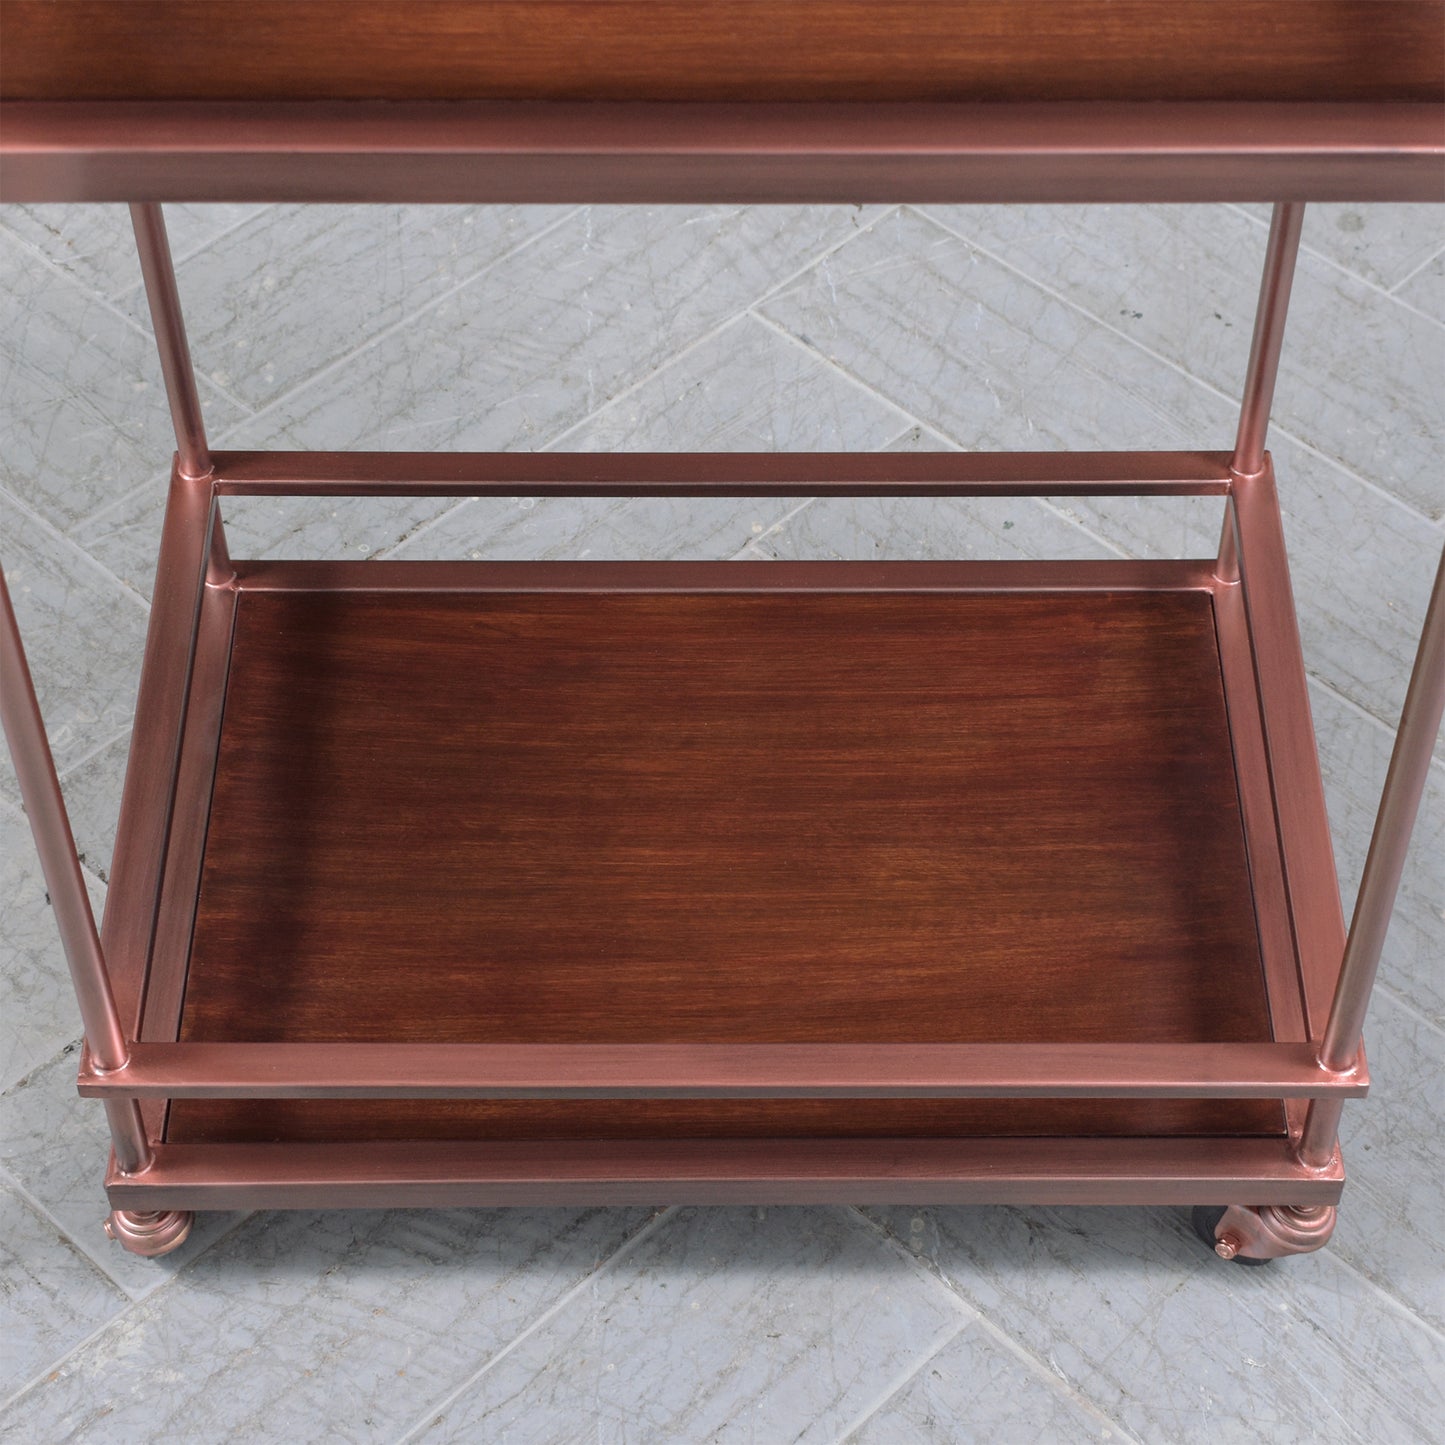 Vintage 1980s Walnut and Metal Copper Finish Bar Cart